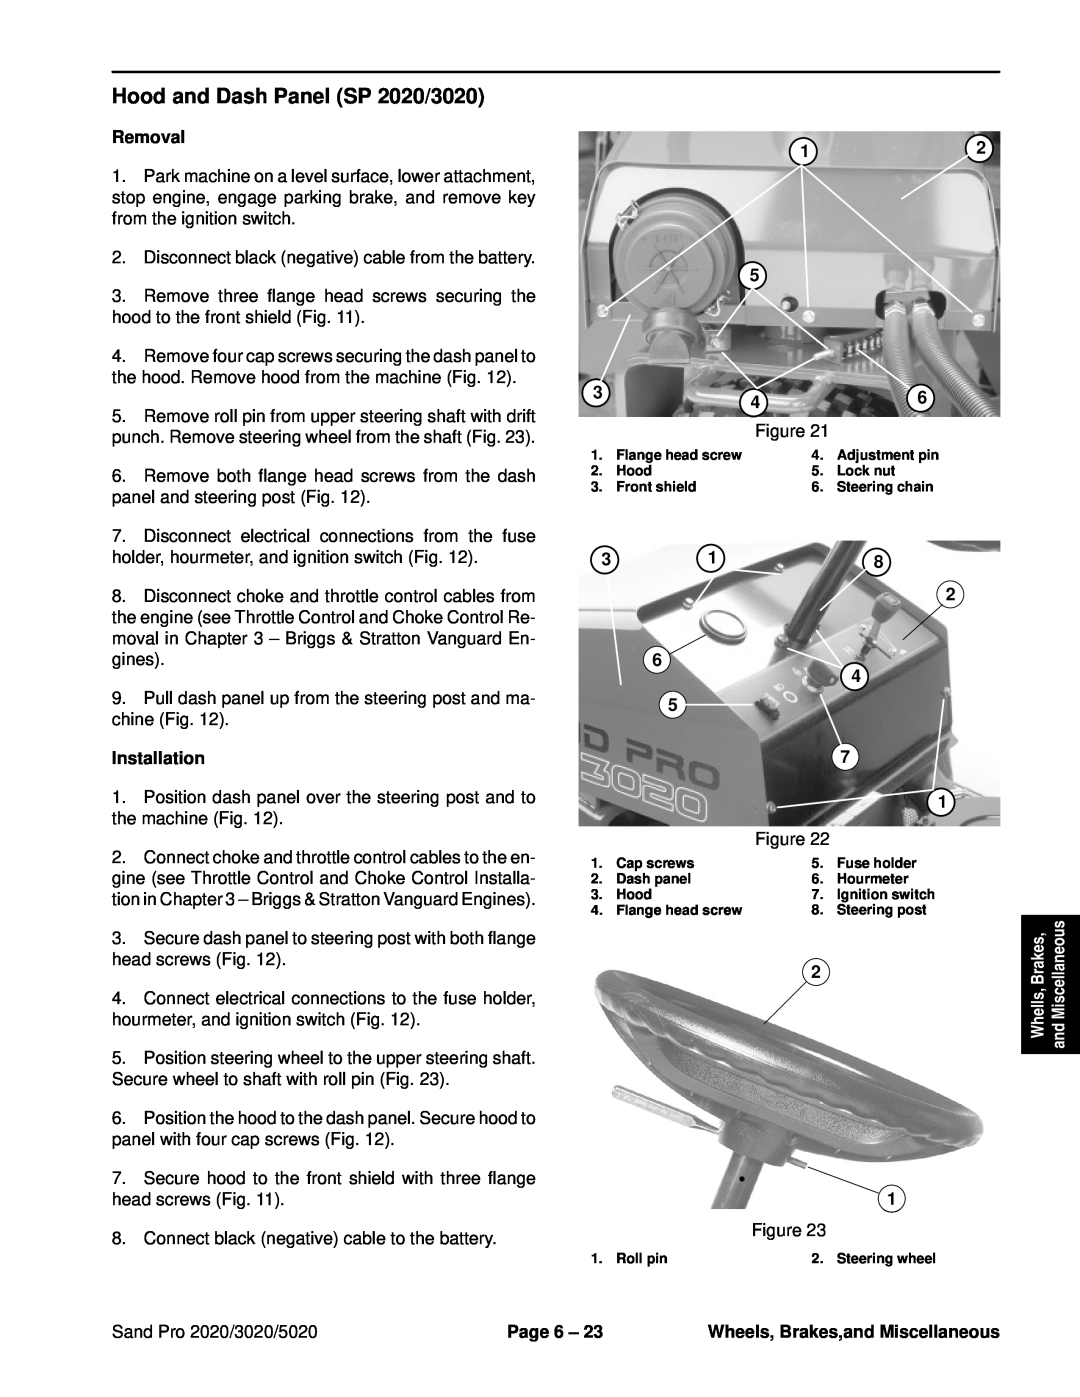 Toro service manual Hood and Dash Panel SP 2020/3020, Removal, Installation, Sand Pro 2020/3020/5020, Page 6 